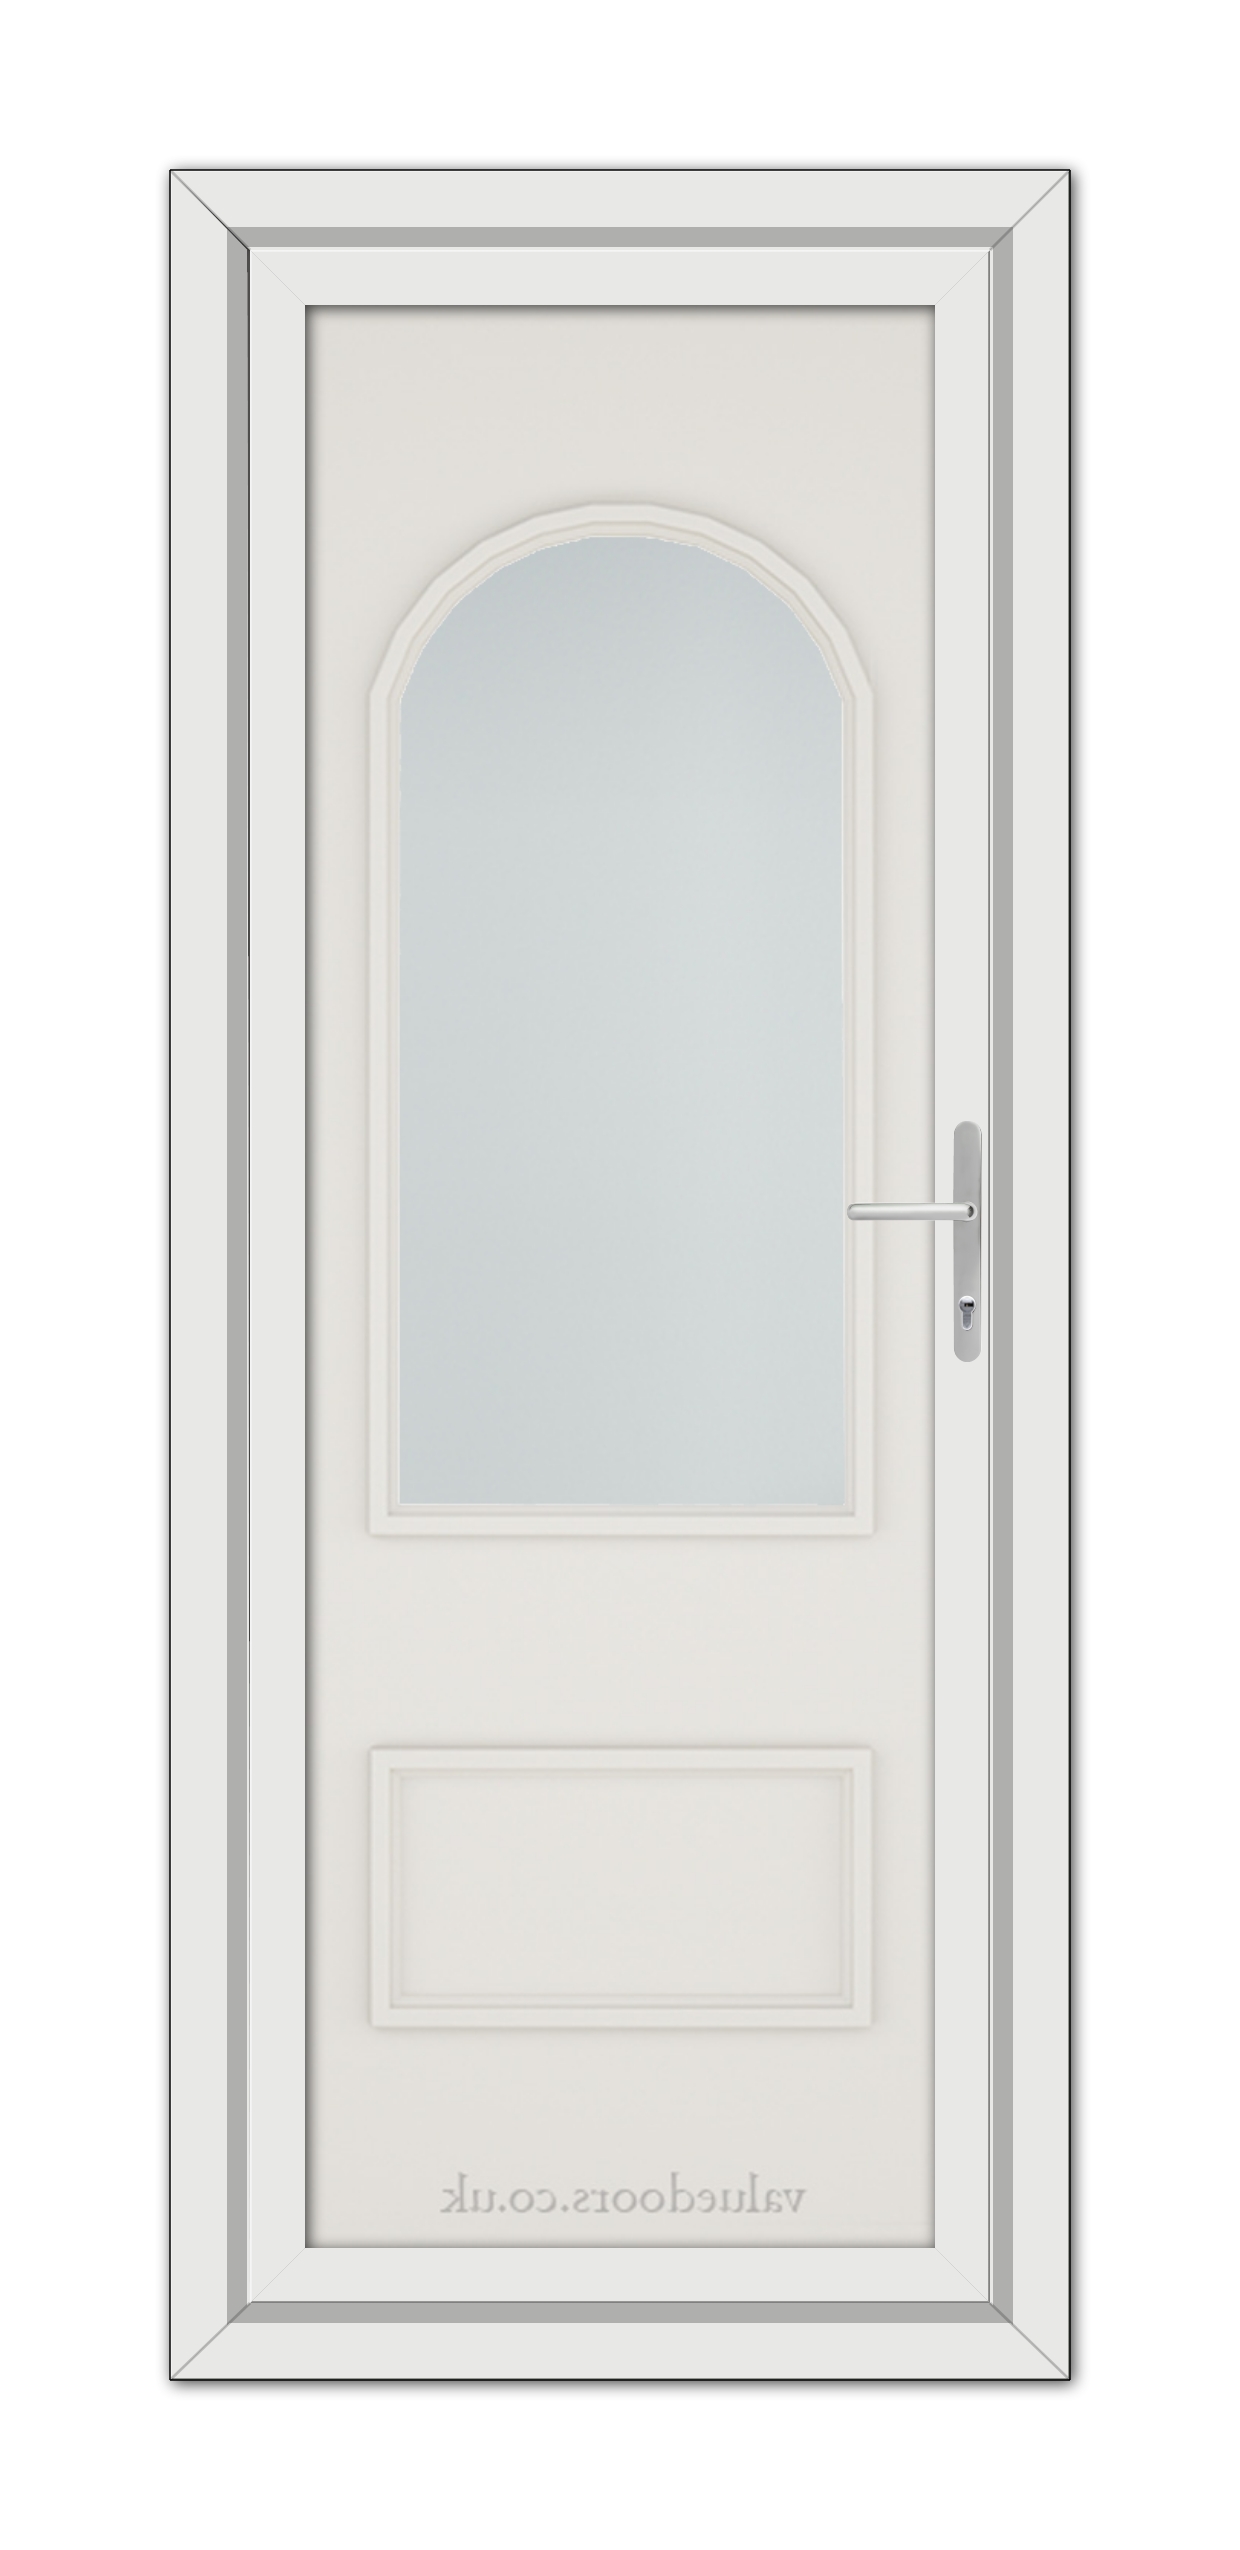 White Cream Rockingham uPVC door with a large frosted glass window at the top, a metallic handle on the right, and a visible manufacturer's stamp at the bottom.